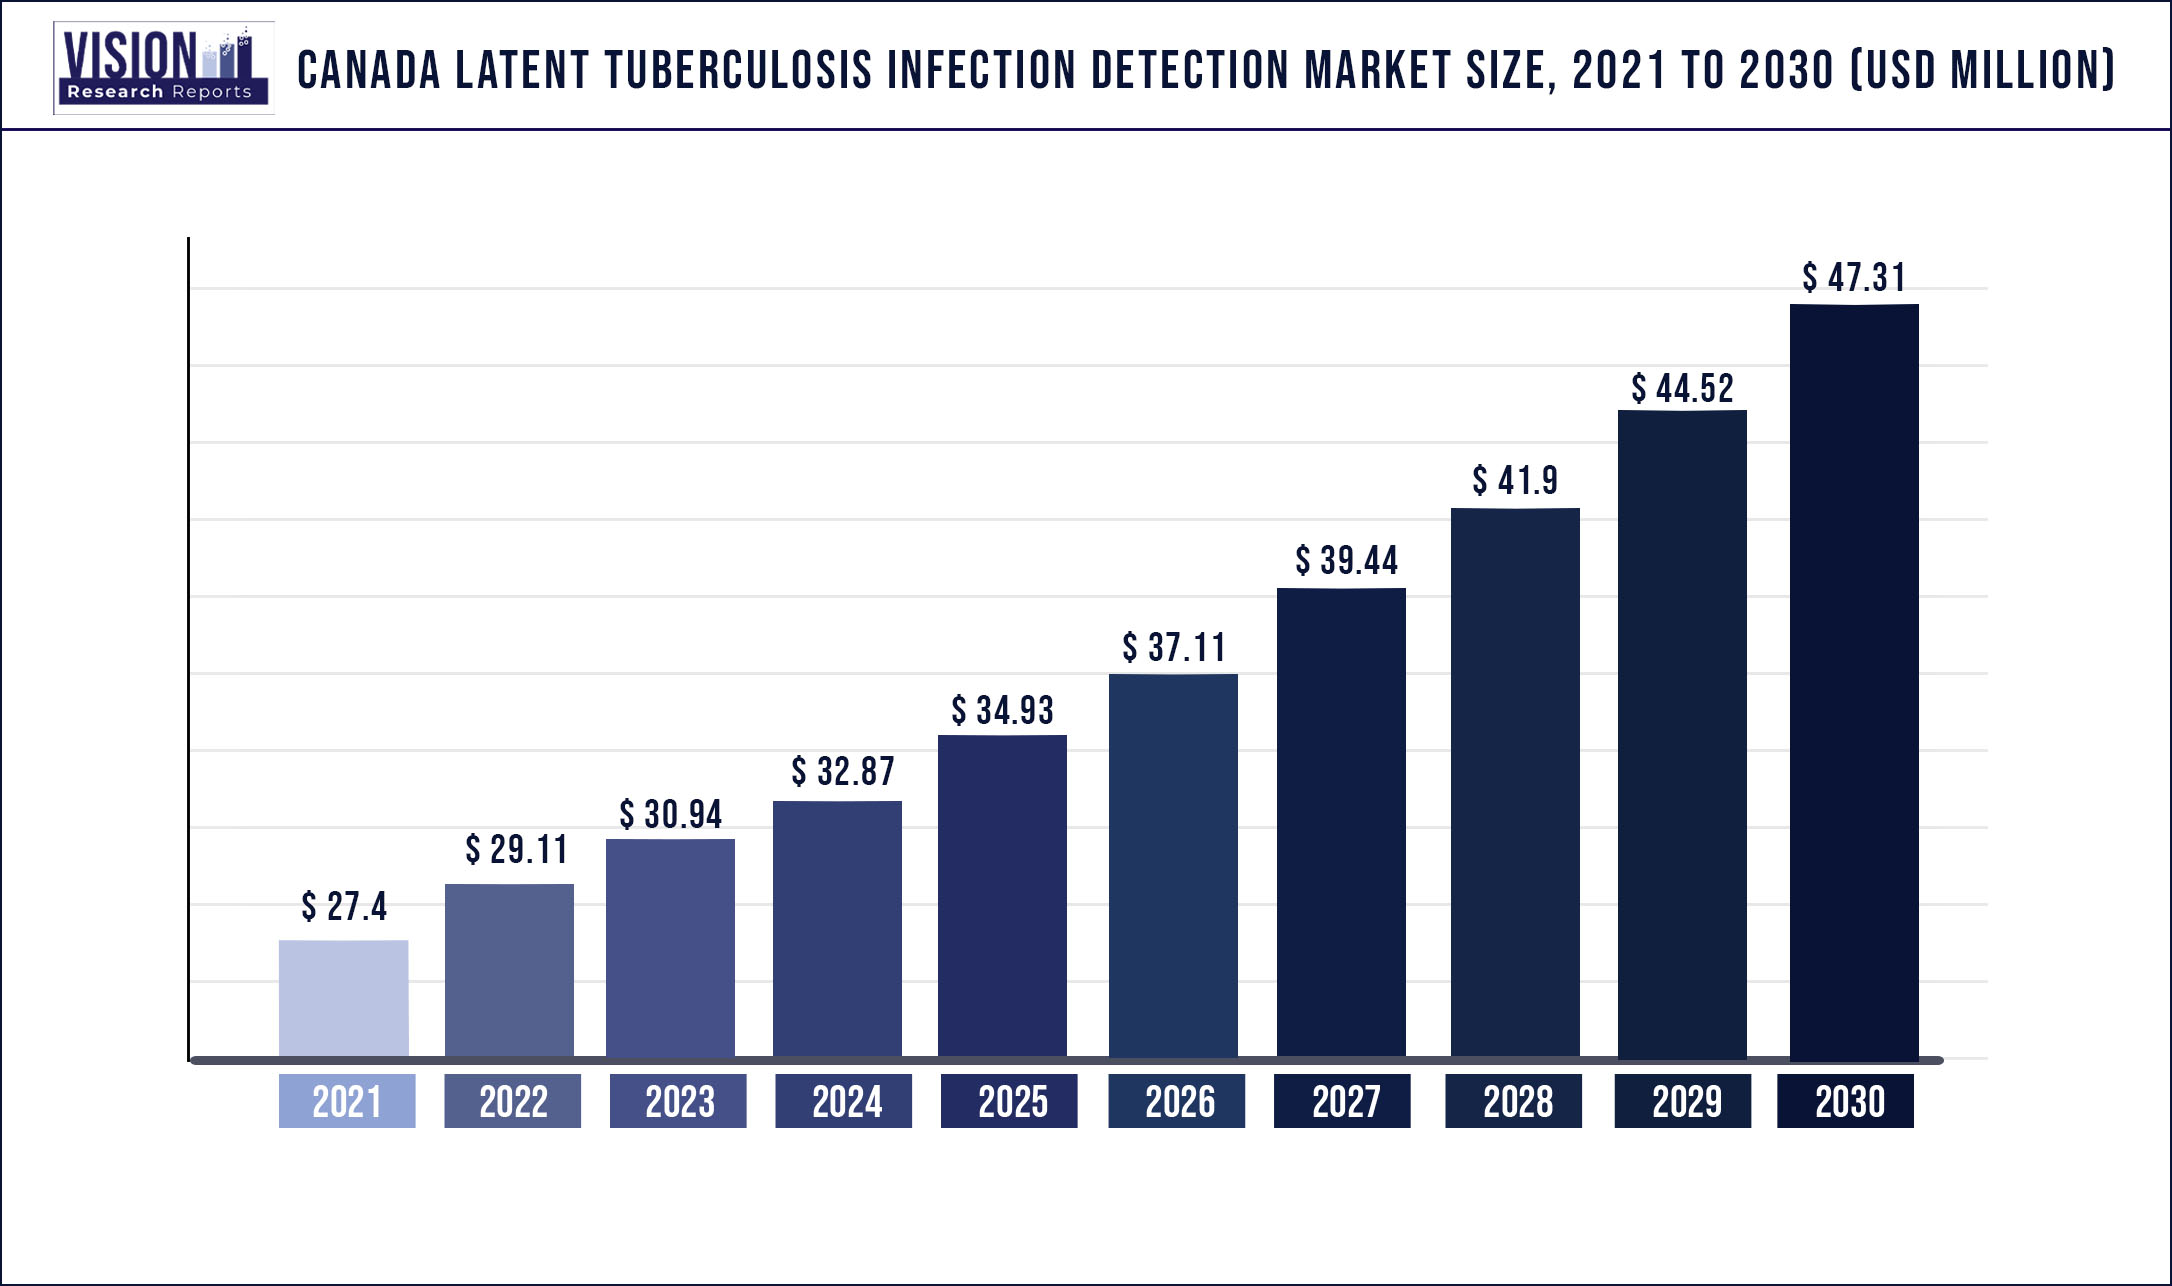 Canada Latent Tuberculosis Infection Detection Market Size 2021 to 2030